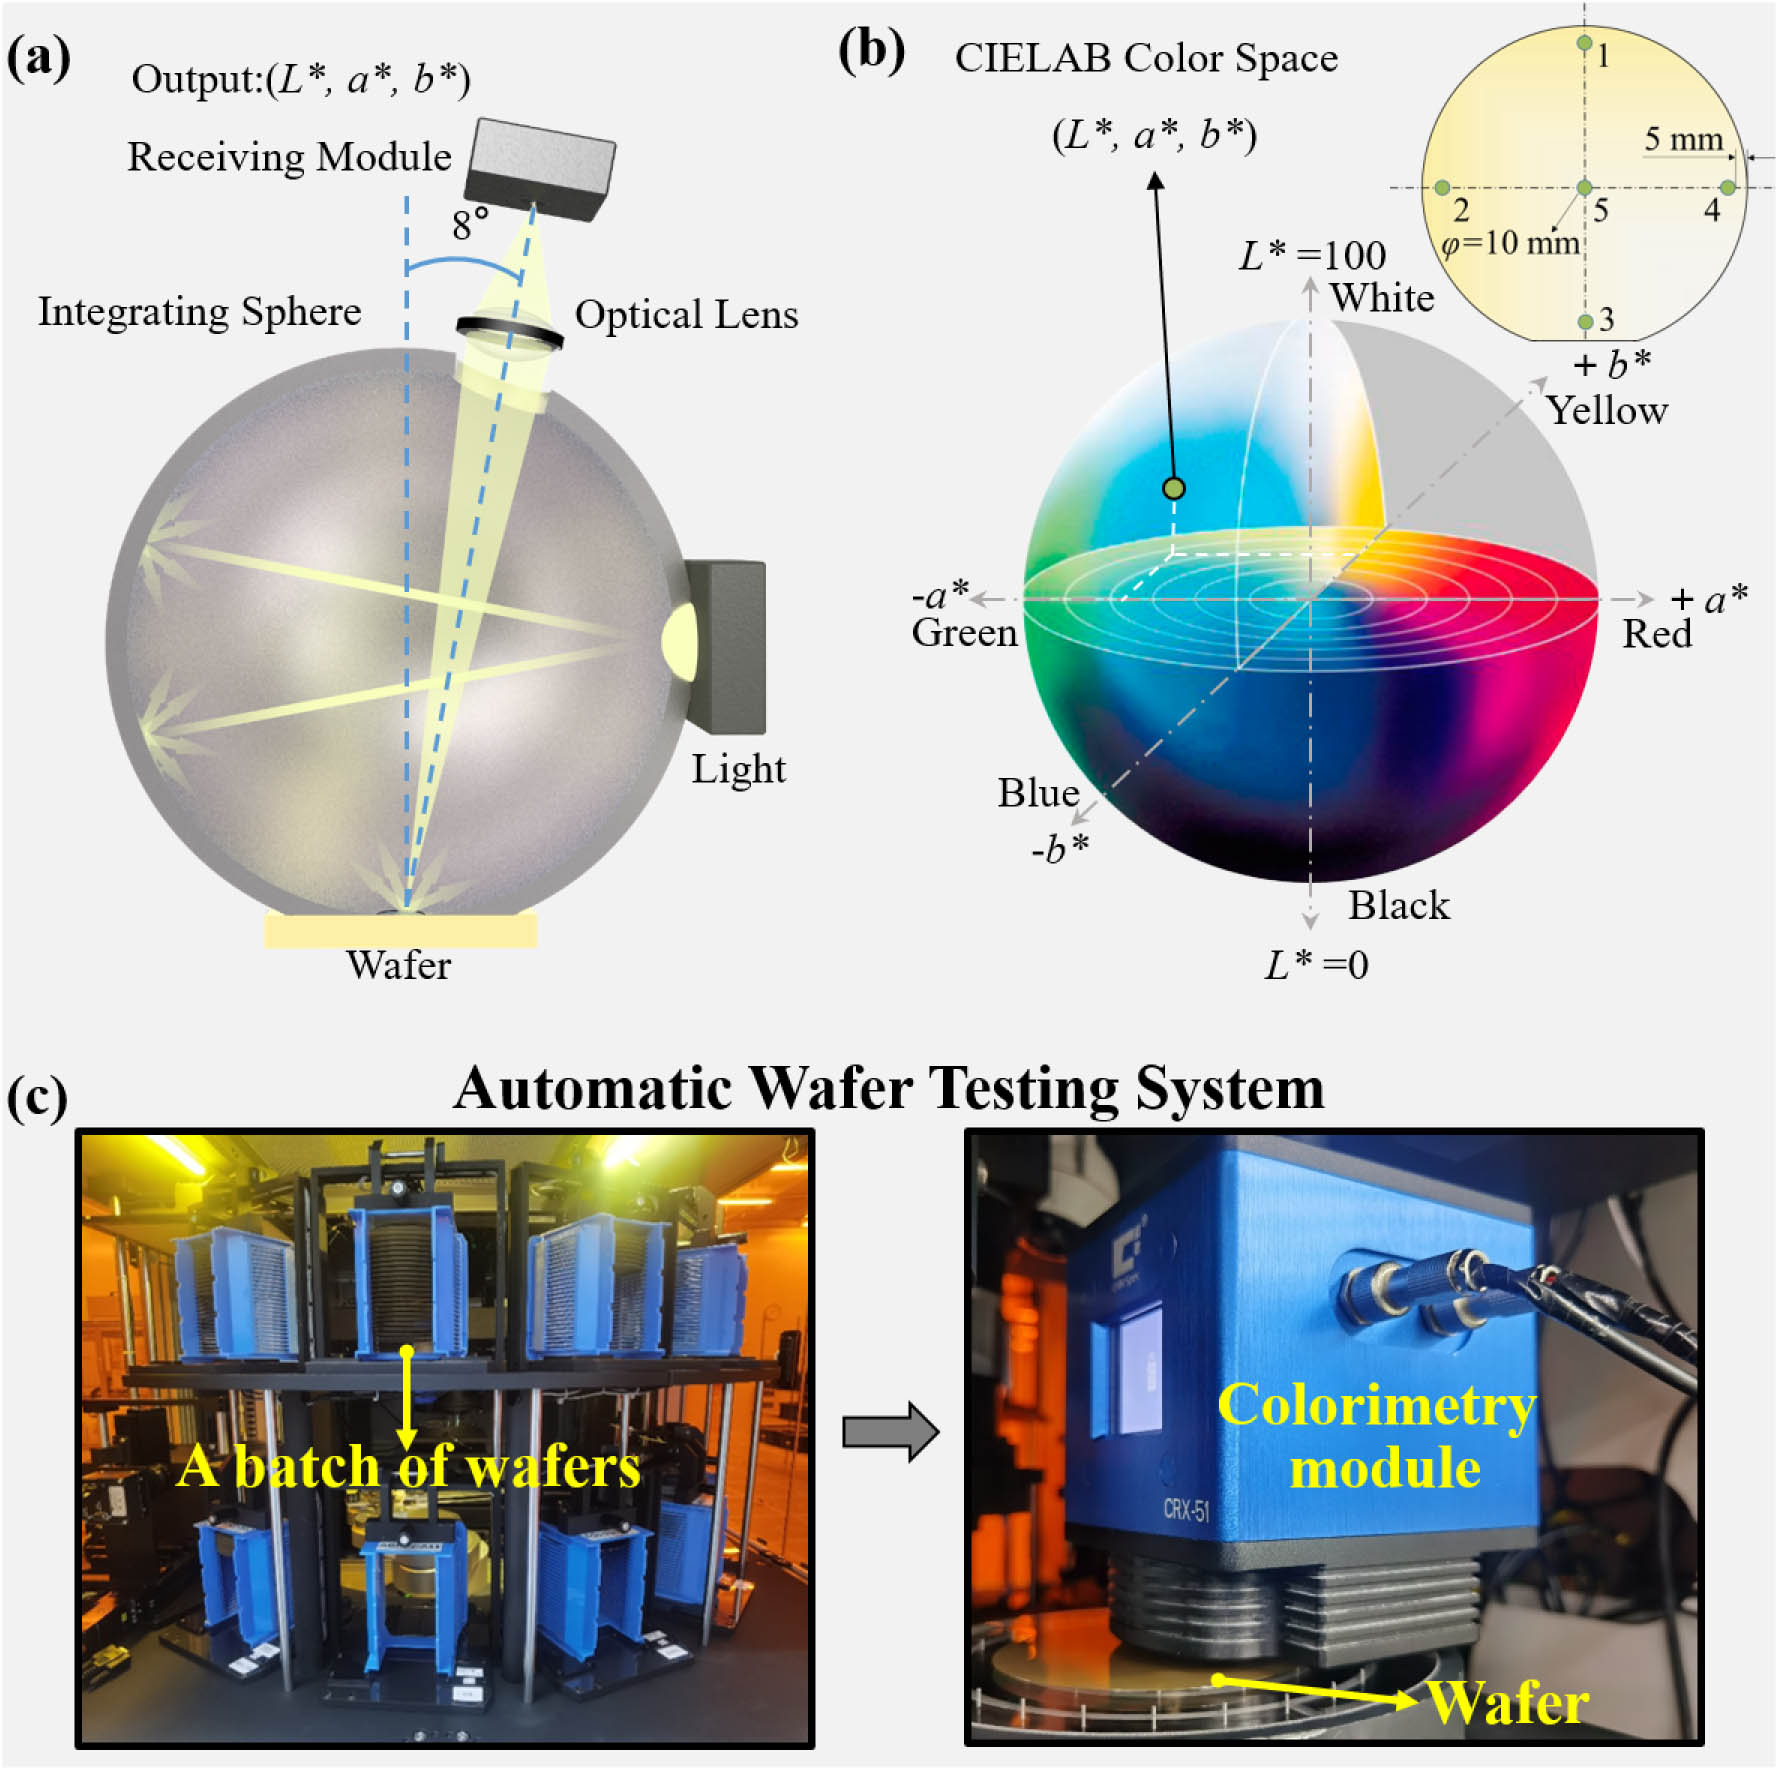 Schematic drawing of the colorimetry scheme for LT-based wafers. (a) Optical measurement system. (b) CIELAB color space for the wafer evaluation, where the inset denotes measurement points on the wafer. (c) Photograph of the nondestructive colorimetry testing system for the LT-based wafer.